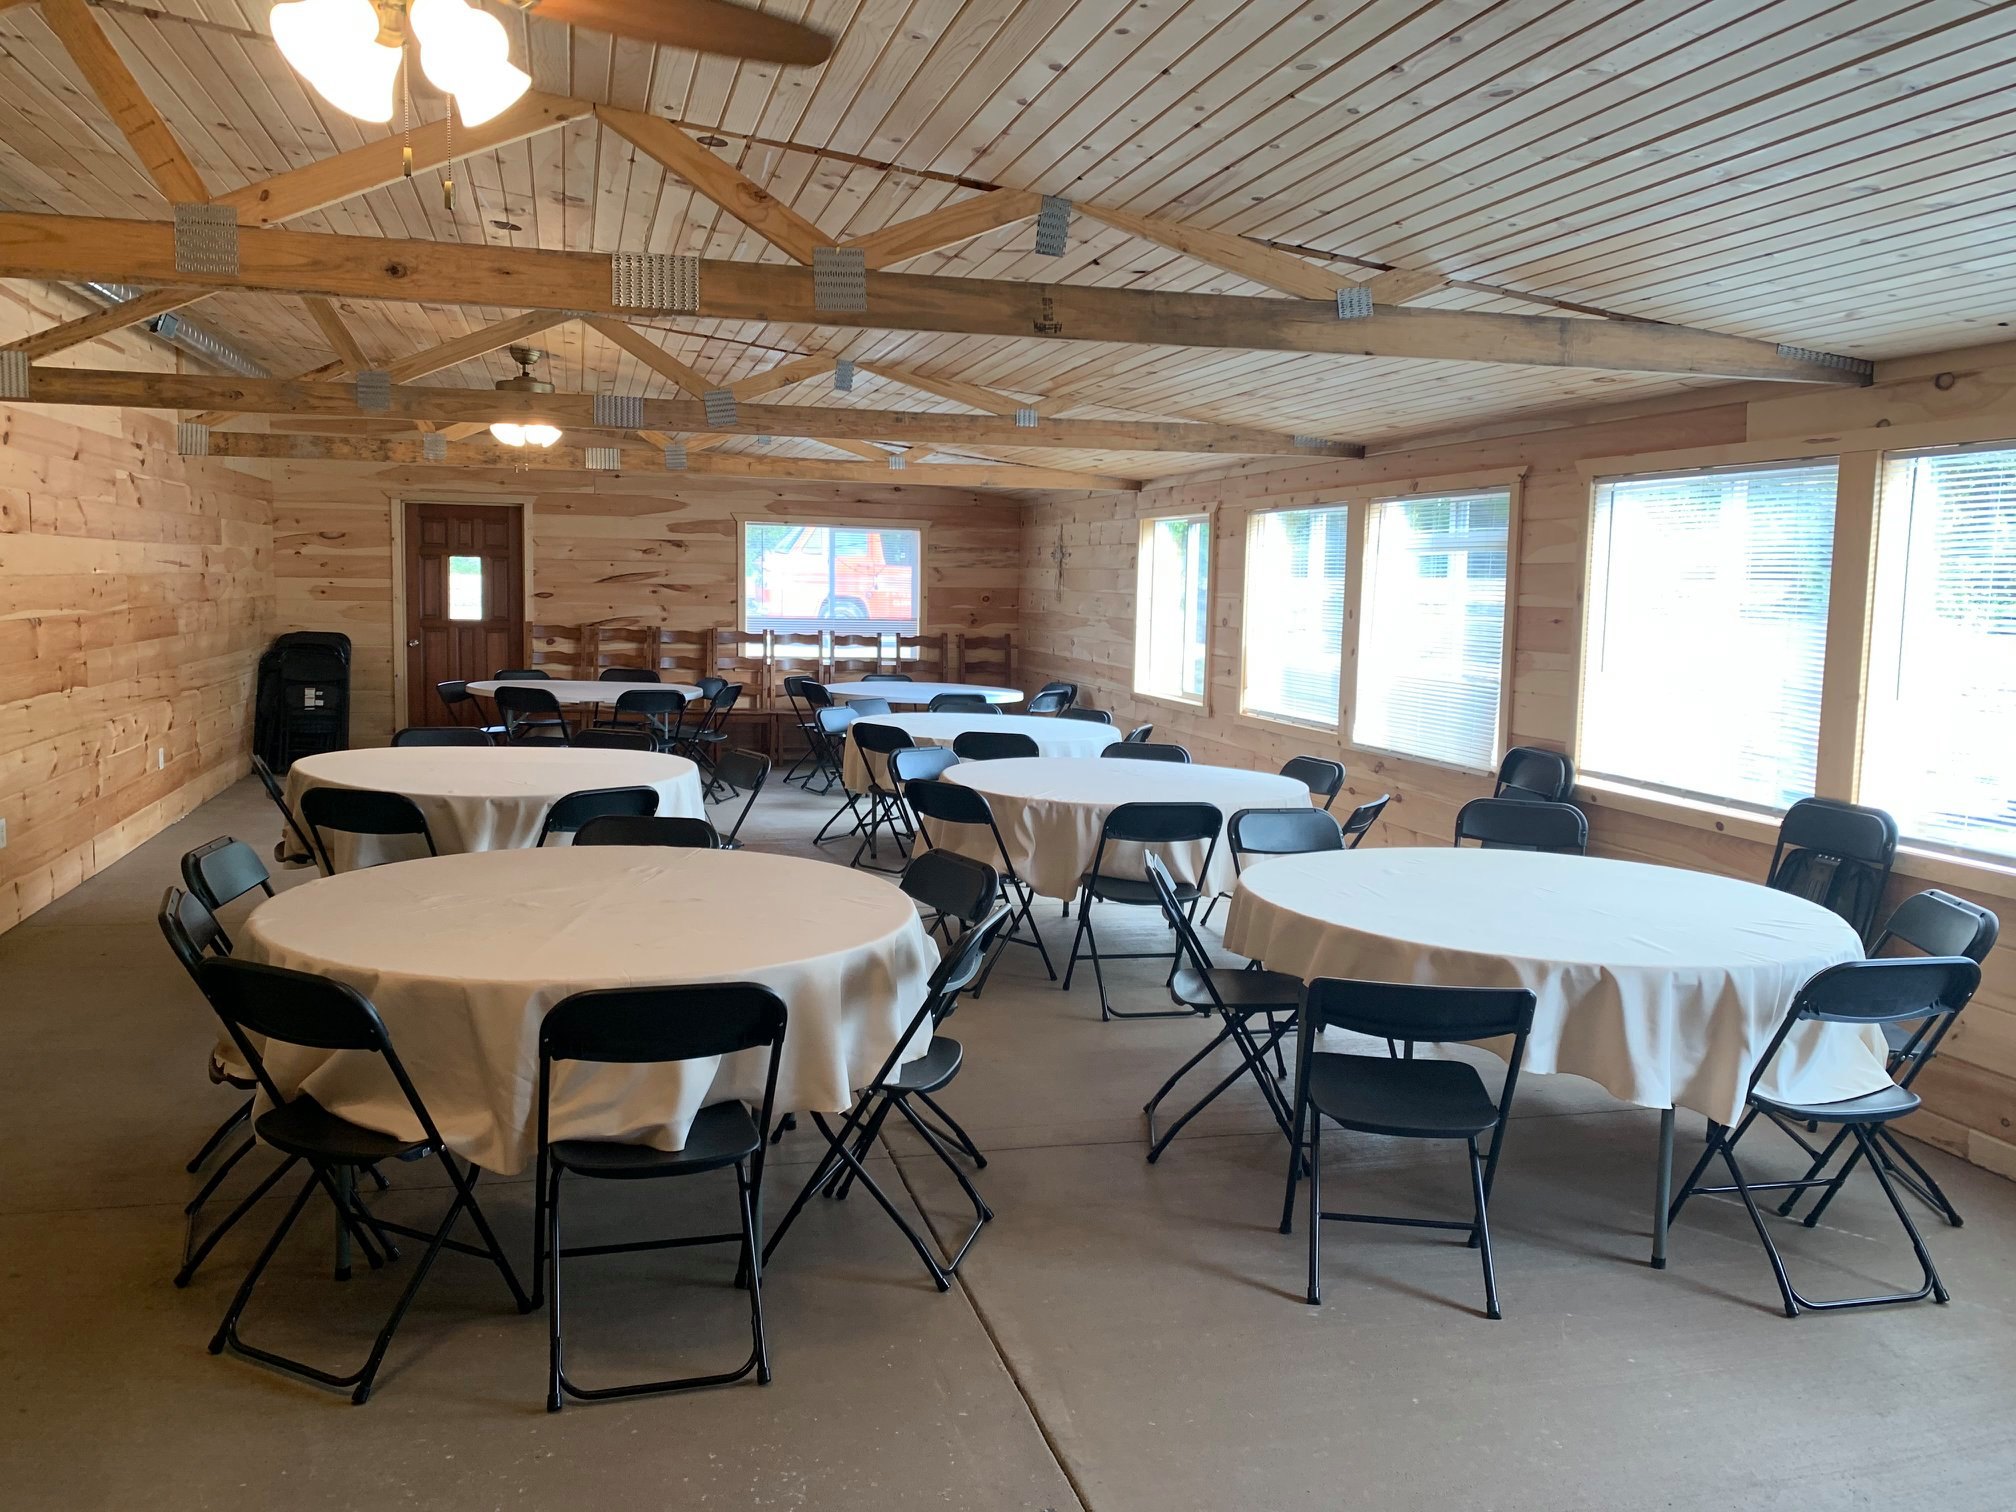 Primitive Olde Crow and Winery- Indoor event room with several windows and tables with white table cloths.